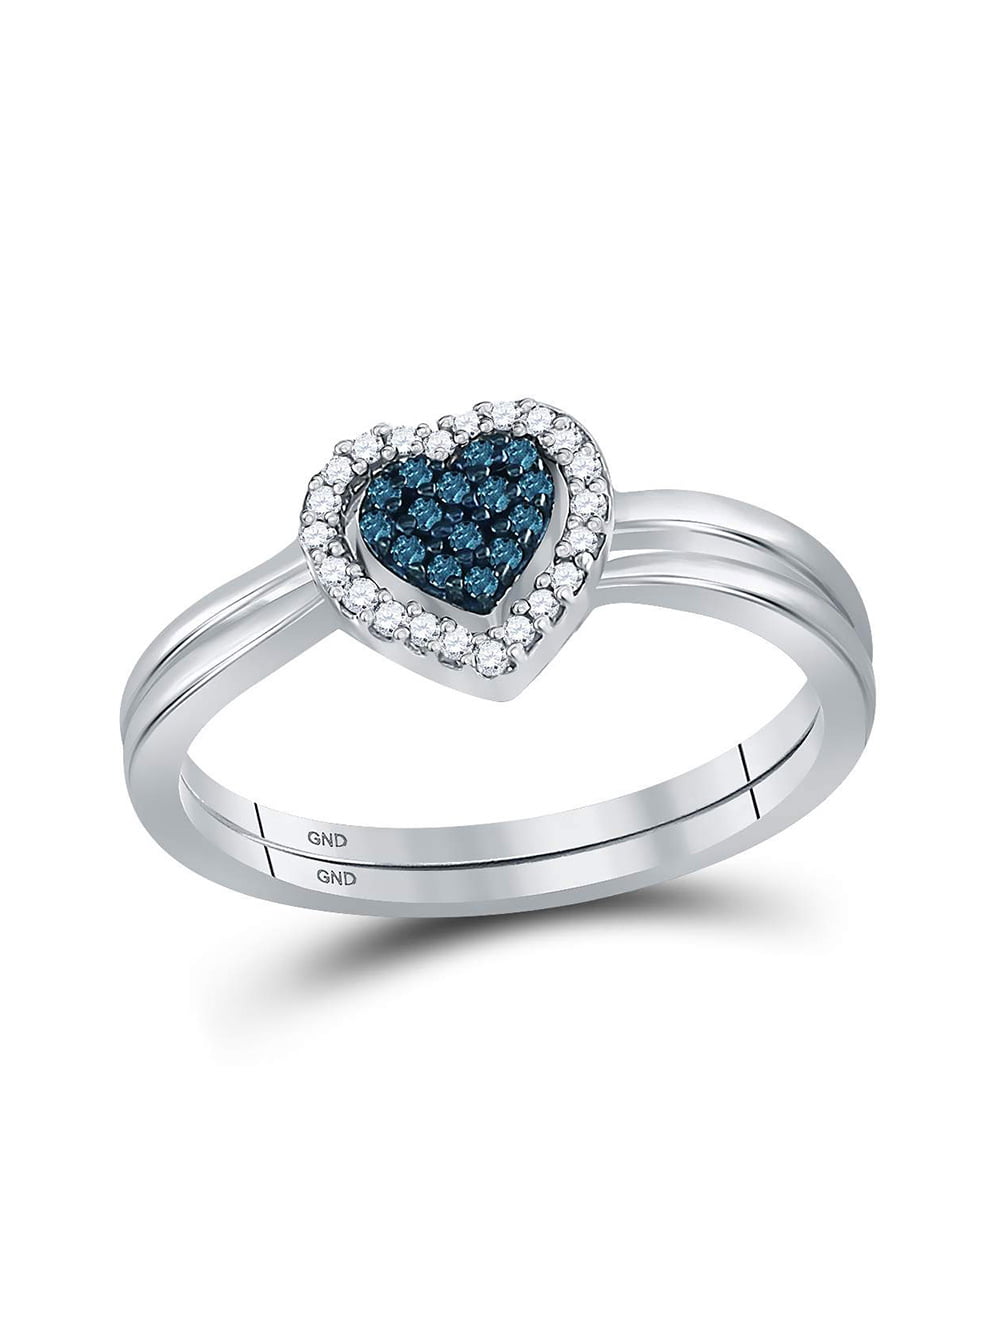 ctw Blue & White Diamond Heart Shaped Bridal Engagement Ring Set 1/4 CT Sterling Silver Dazzlingrock Collection 0.23 Carat